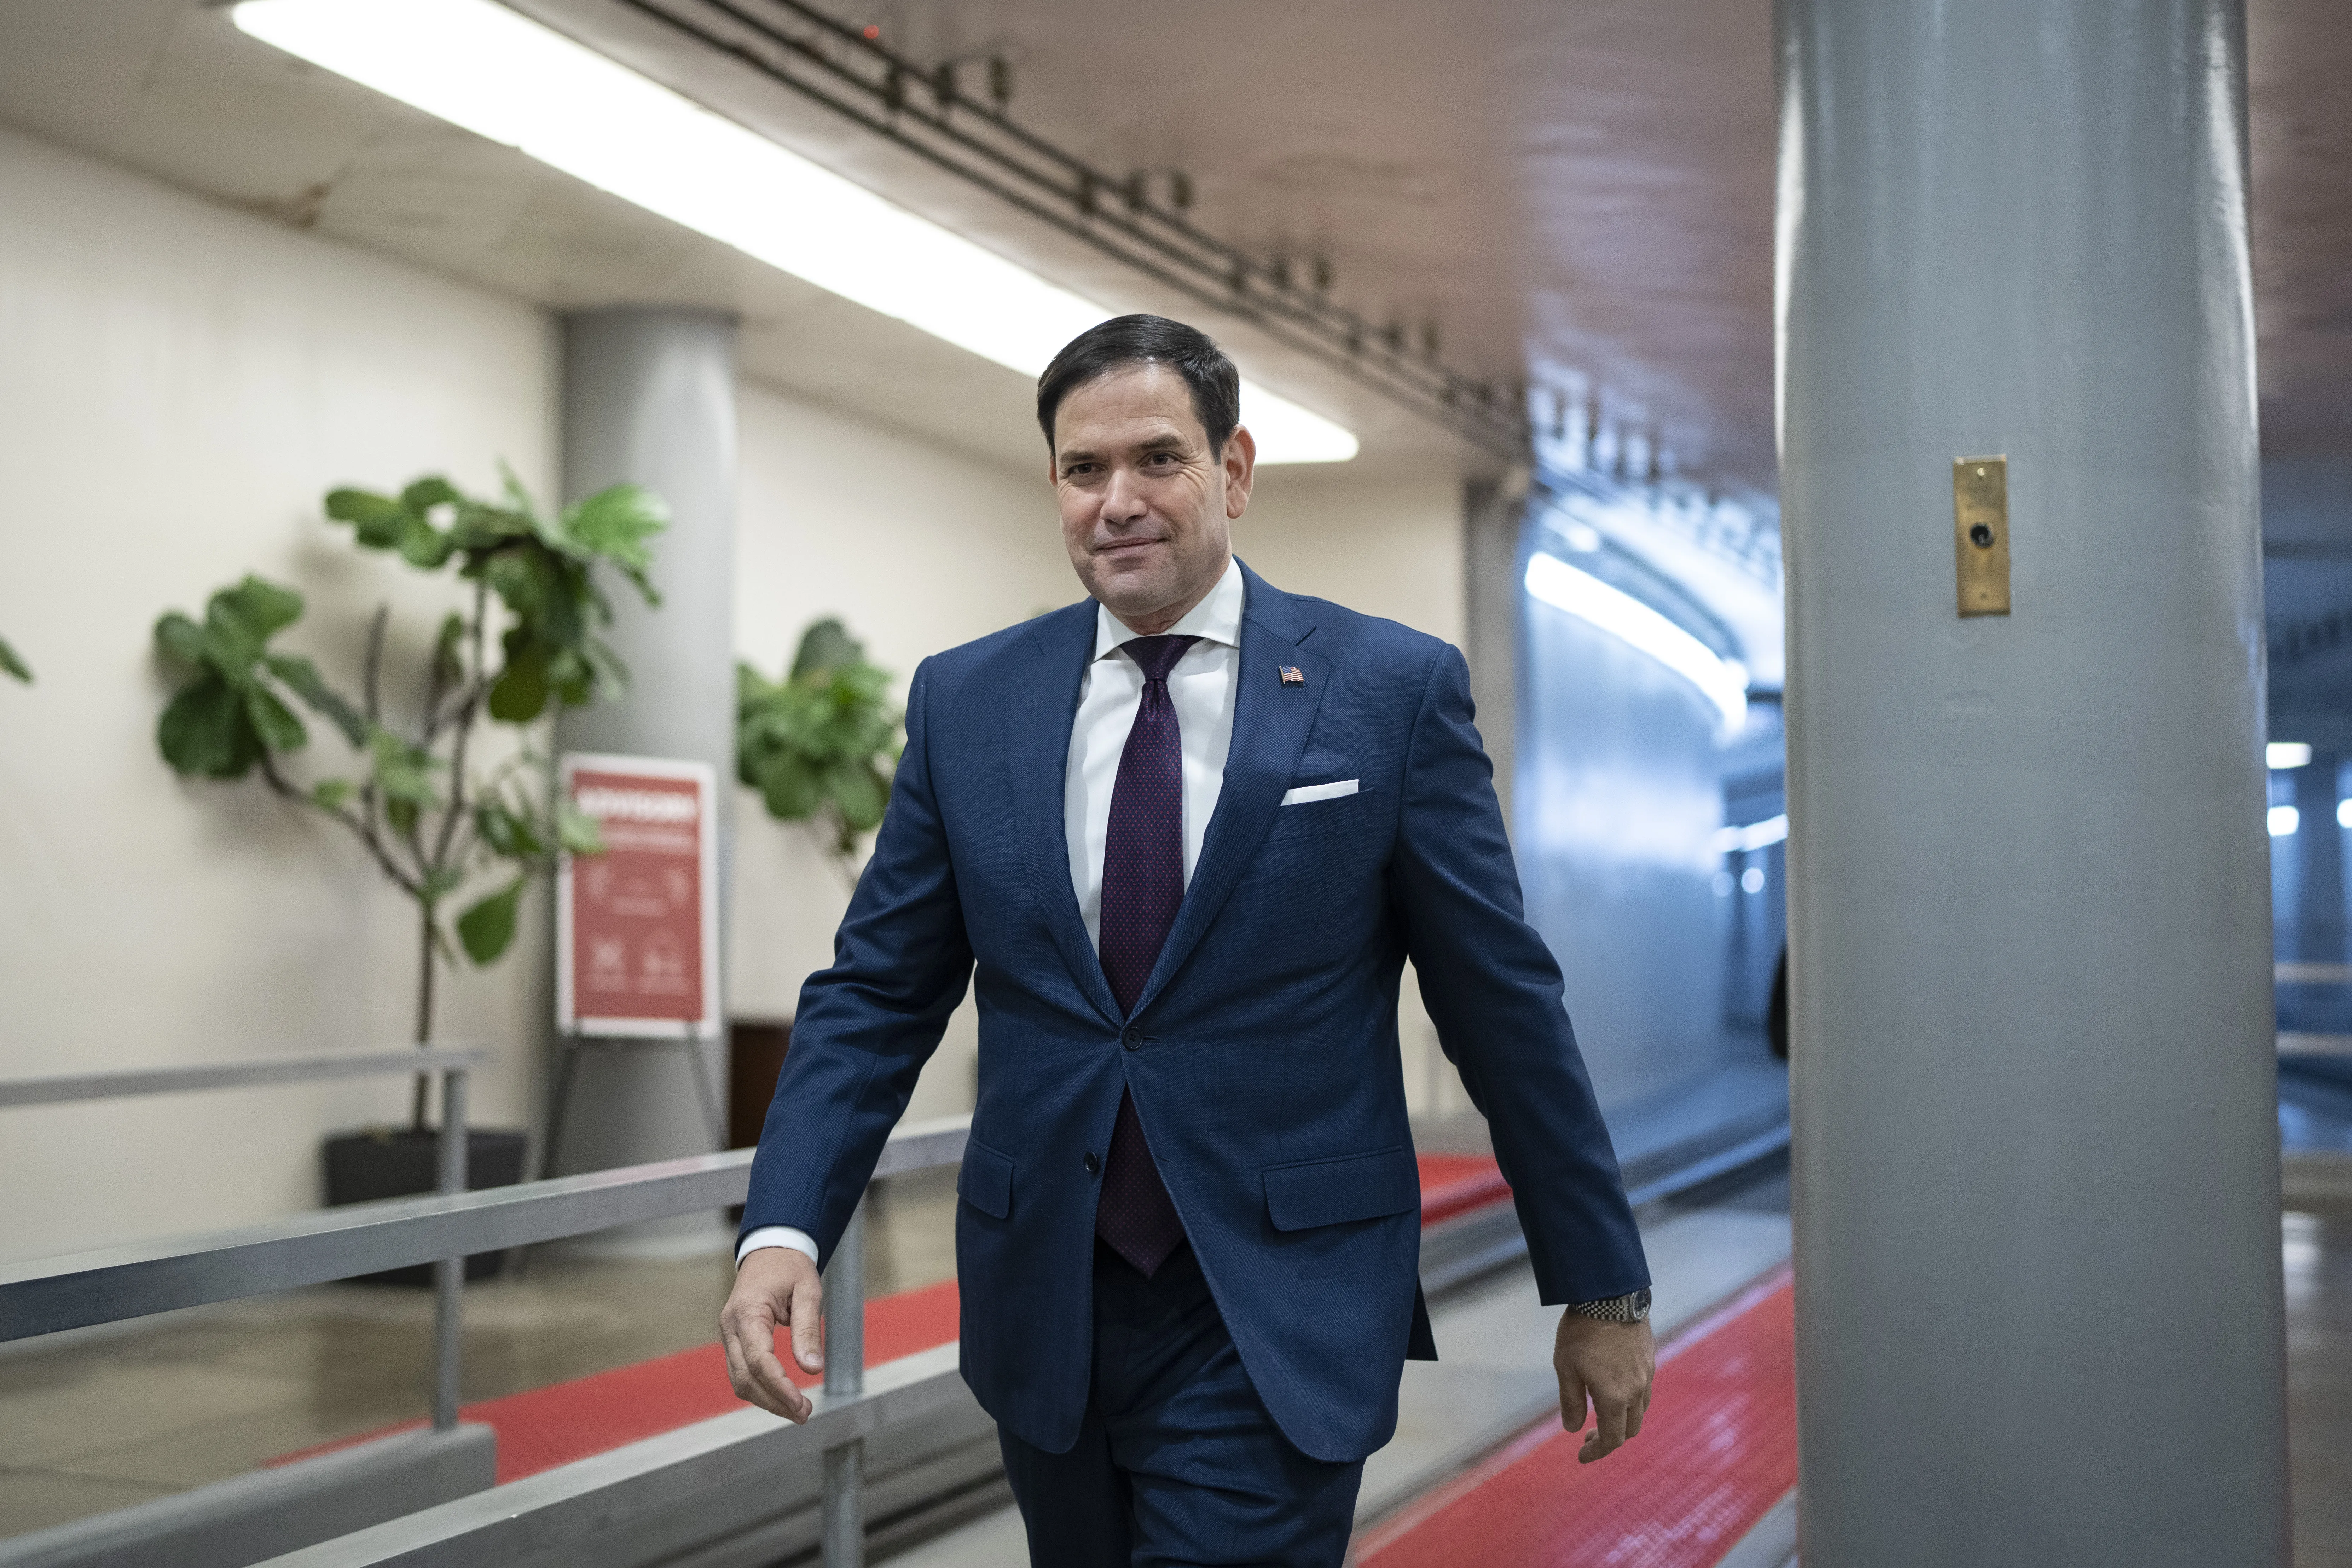 United States Sen. Marco Rubio, R-Florida, on his way to a vote in the U.S. Capitol on Dec. 2, 2021.?w=200&h=150